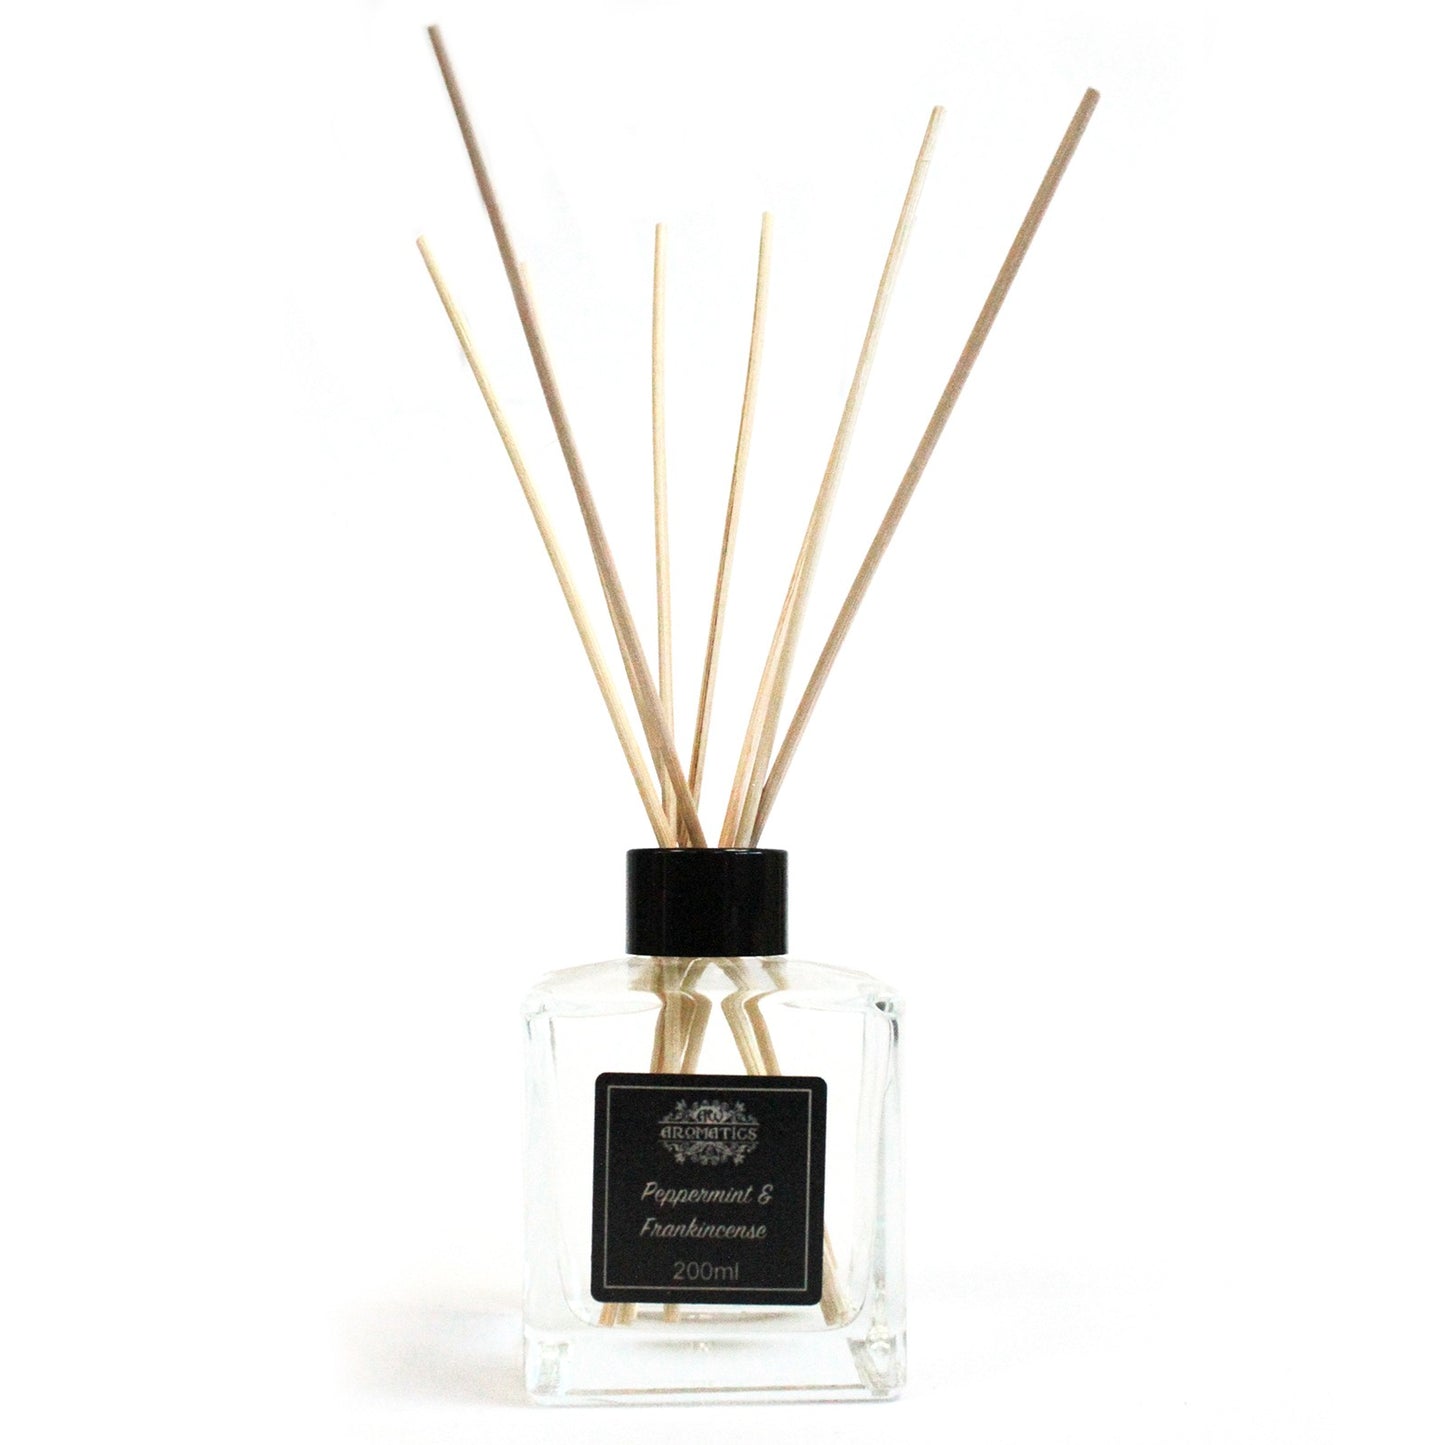 Peppermint & Frankincense Essential Oil Reed Diffuser - 200ml